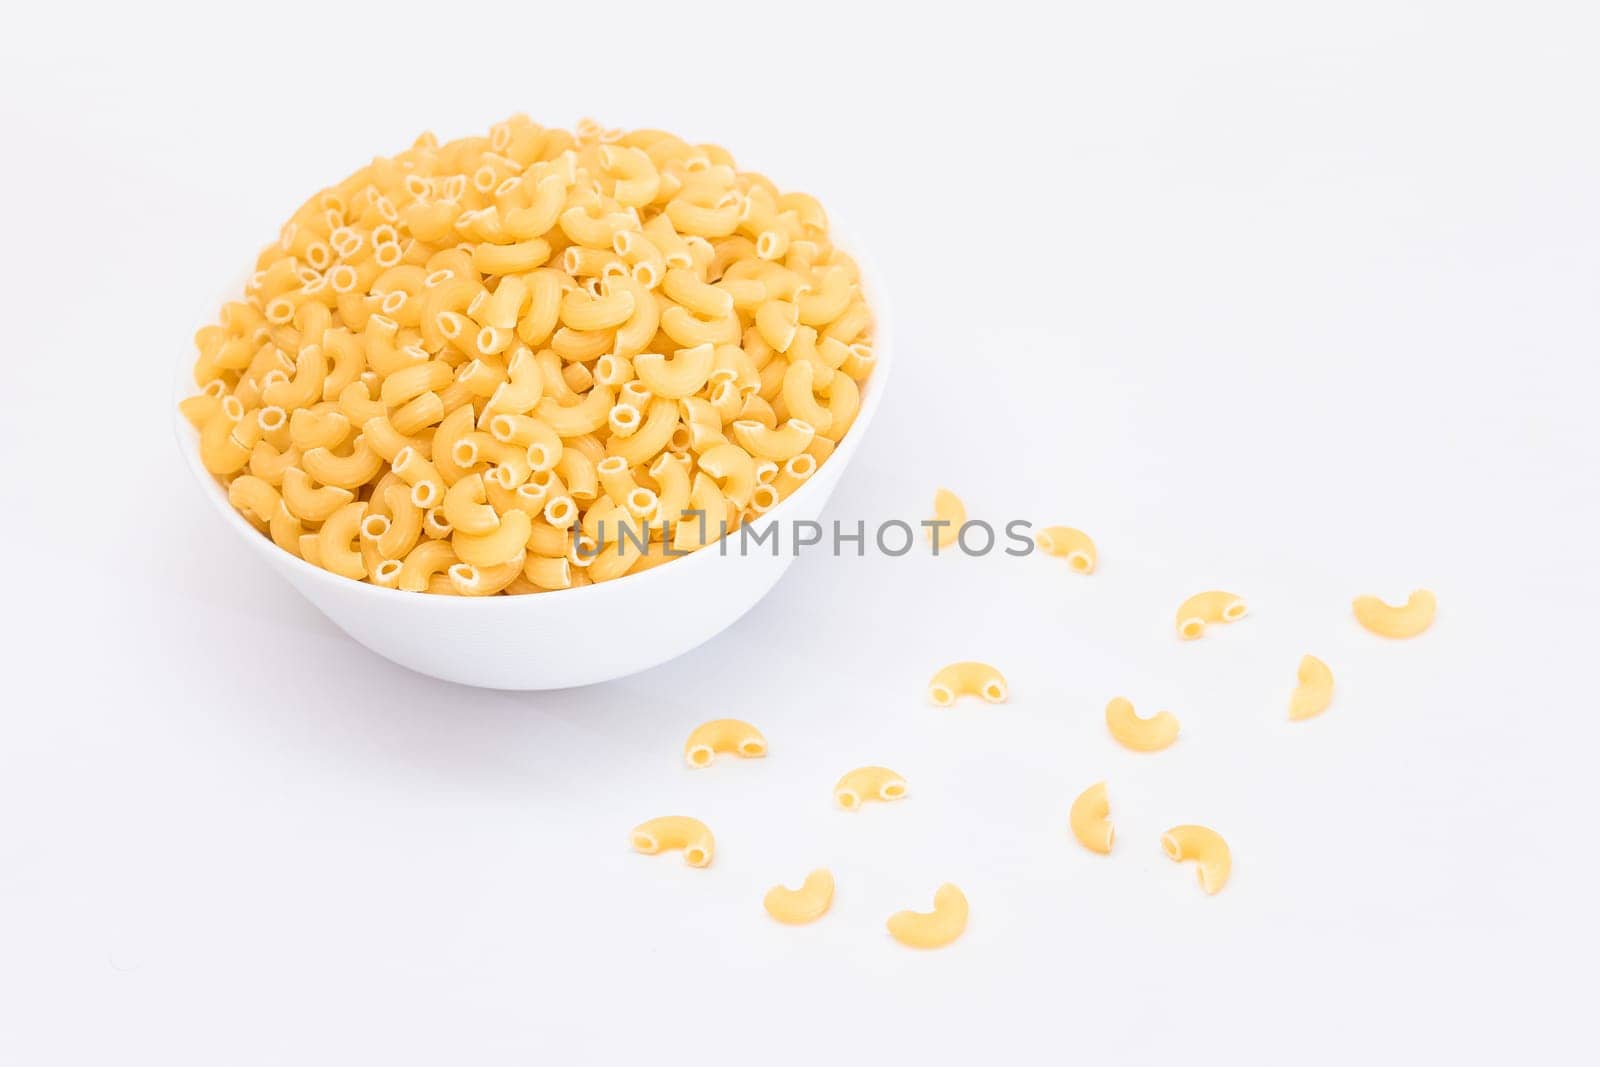 Uncooked Chifferi Rigati Pasta in White Cup Isolated on White Background. Fat and Unhealthy Food. Scattered Classic Dry Macaroni. Italian Culture and Cuisine. Raw Pasta - Isolation